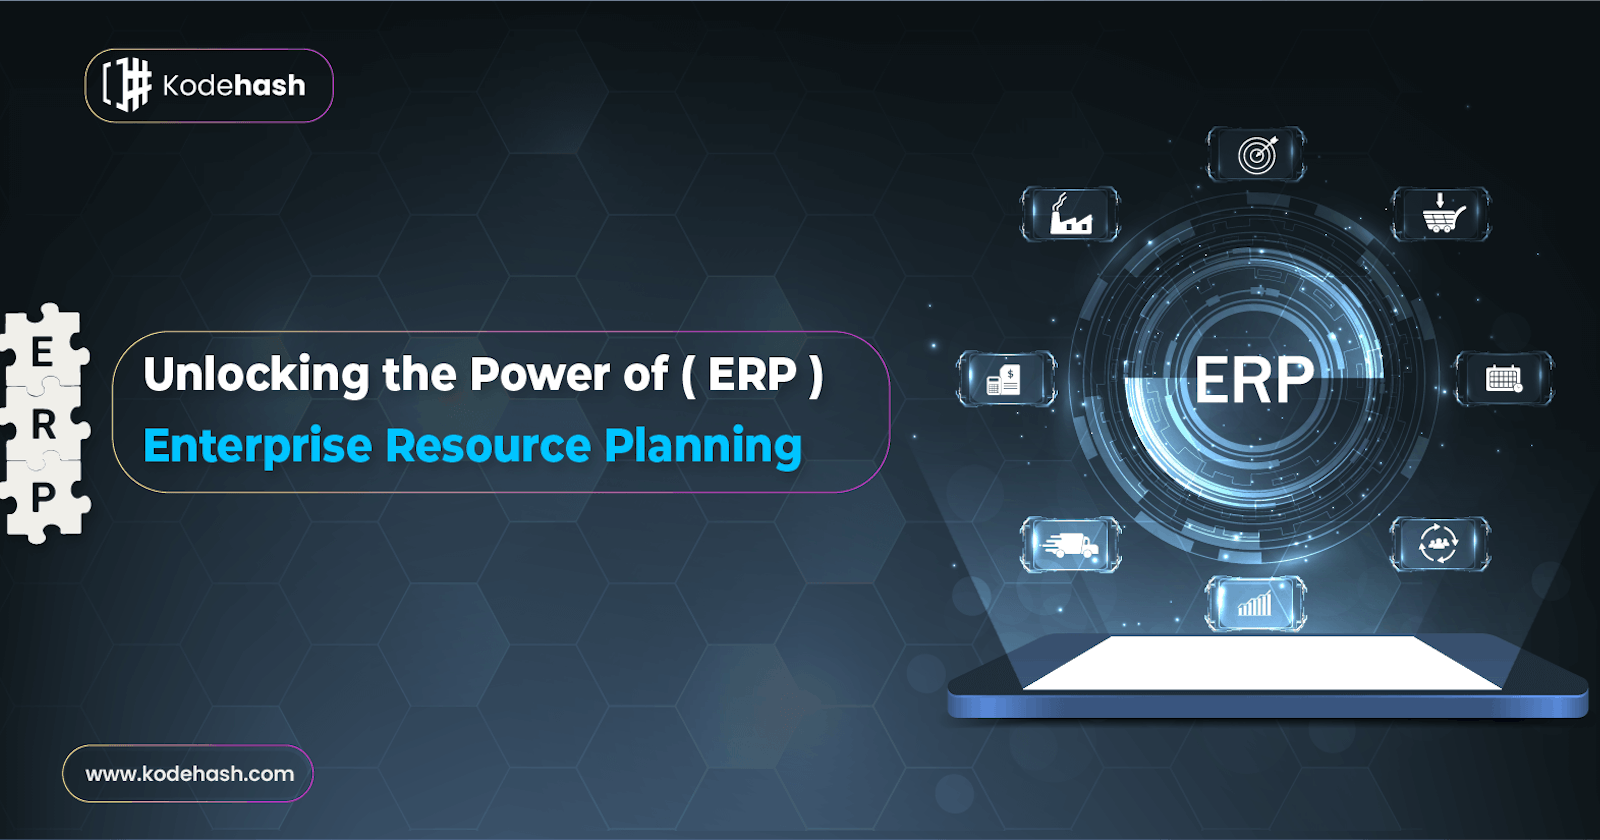 The Power of Enterprise Resource Planning (ERP):